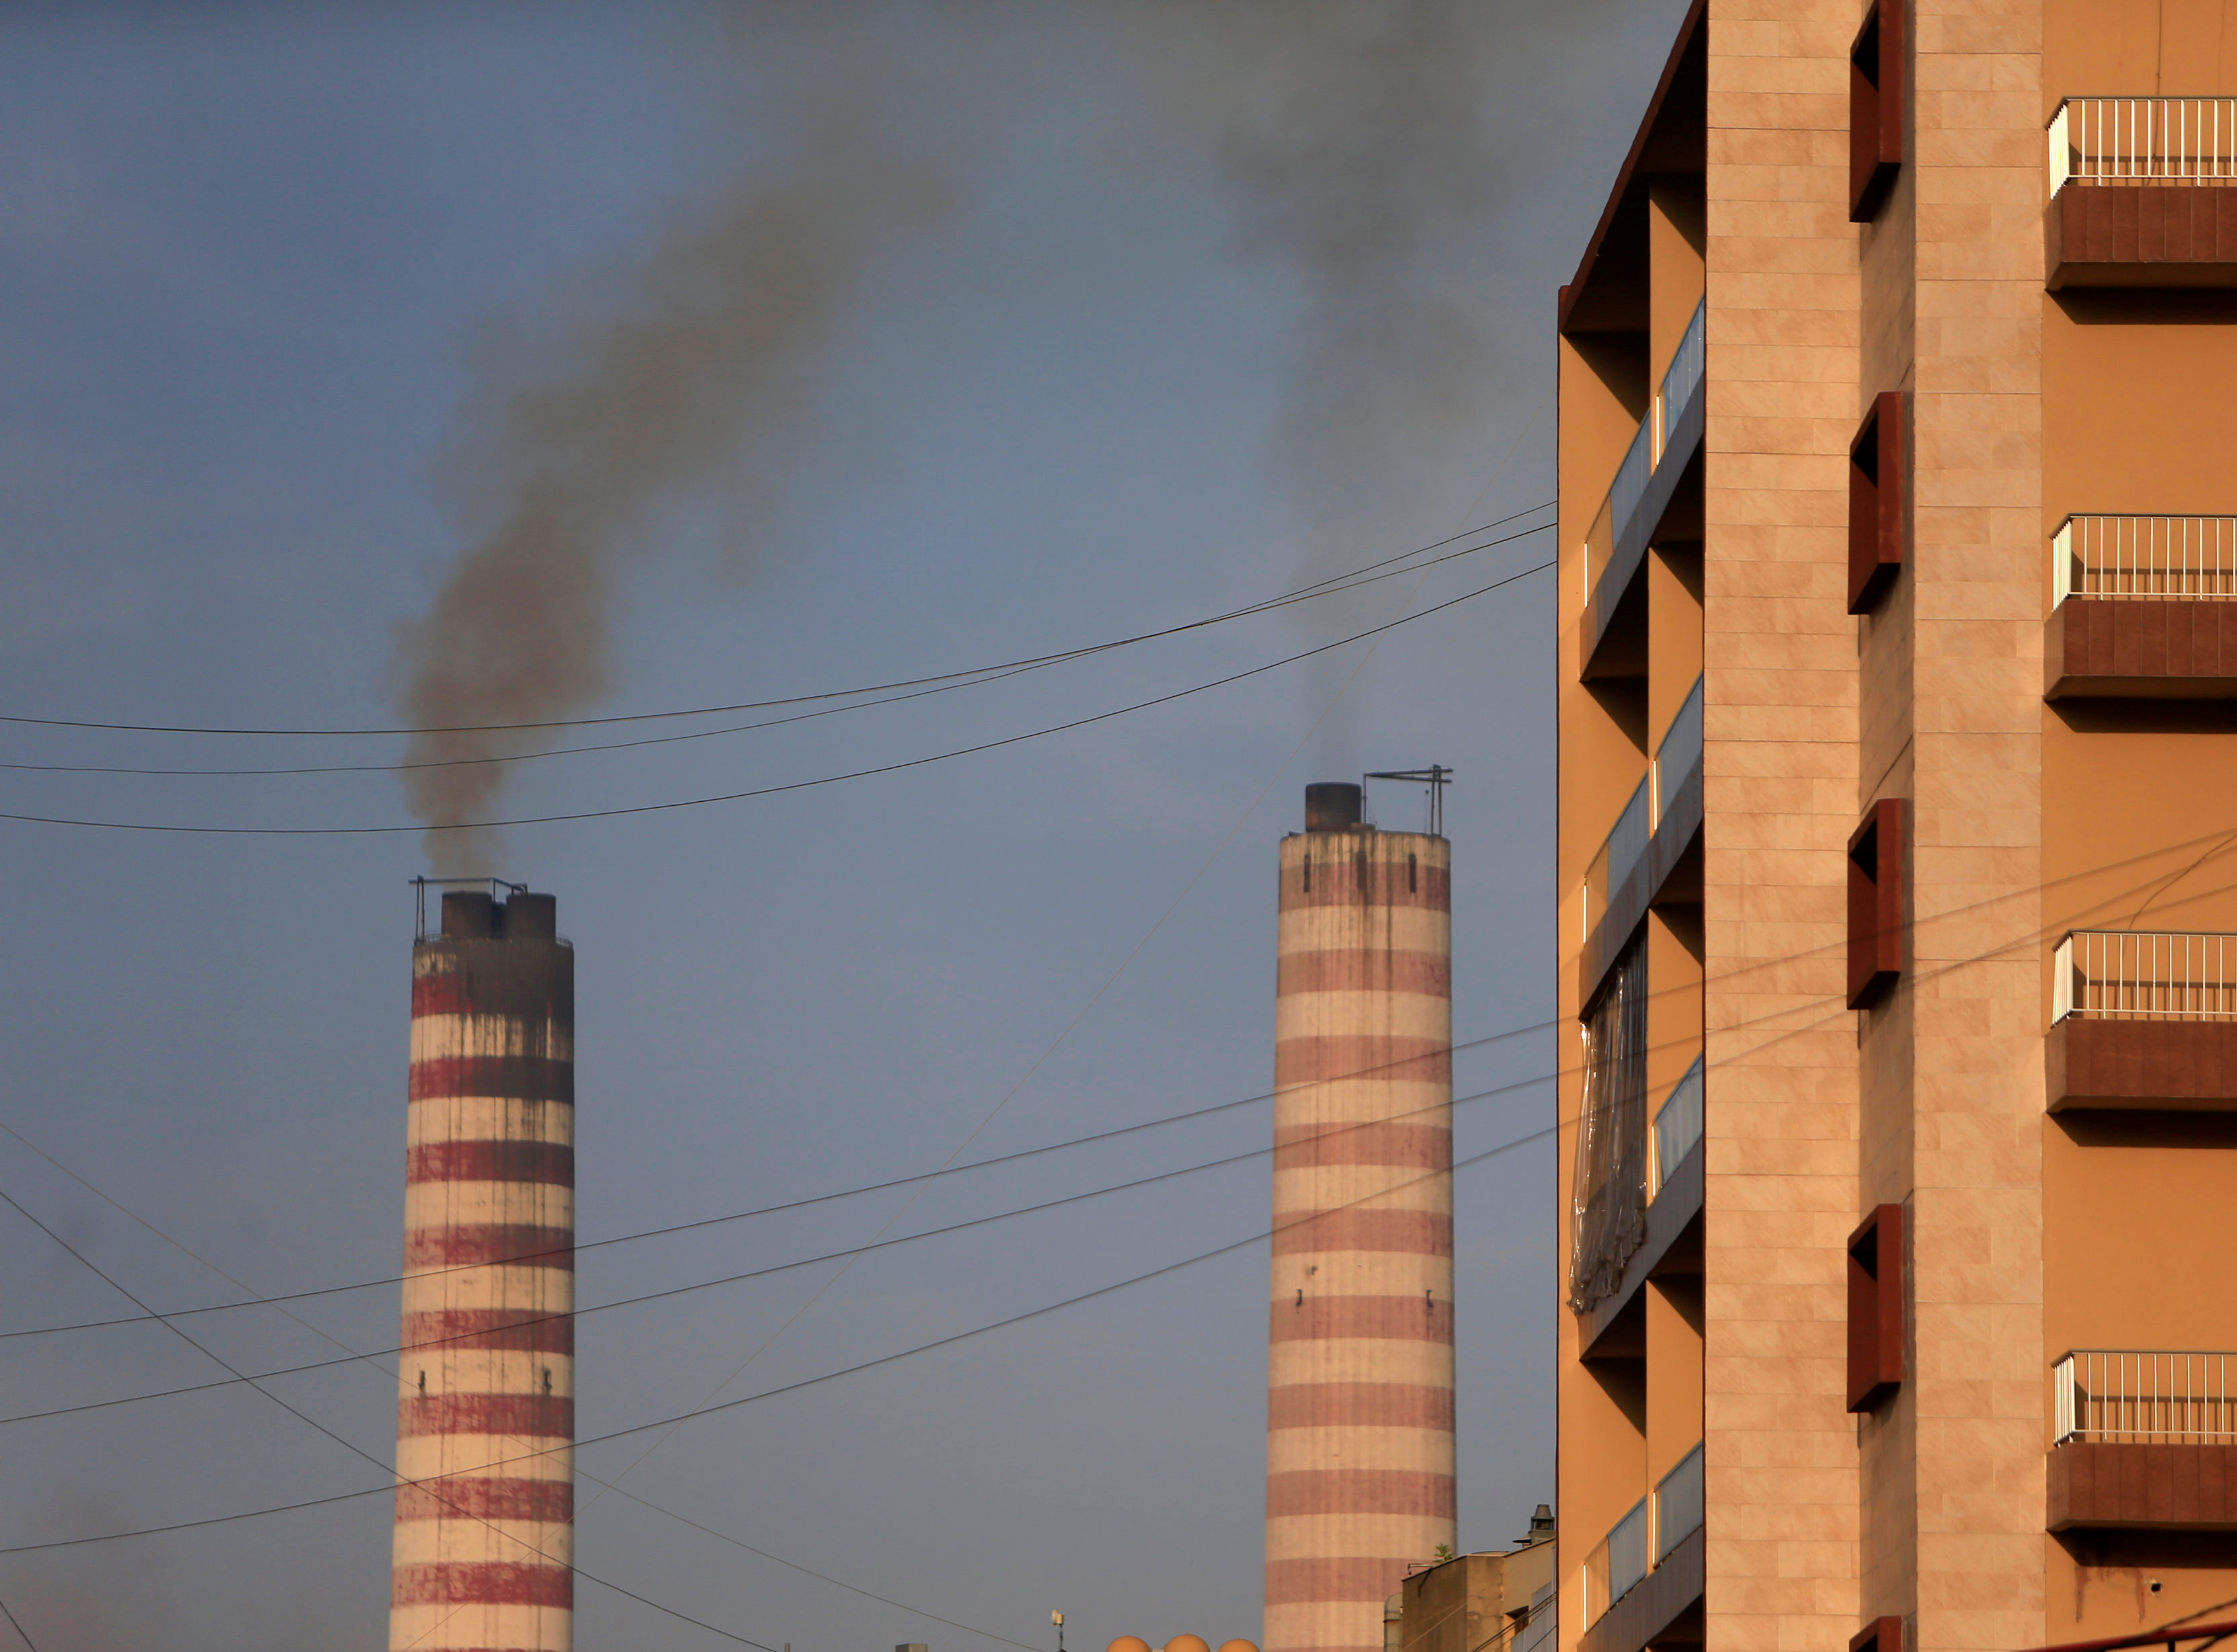 Smoke rises from a power plant near a residential building in Zouk area, north of Beirut (Reuters)